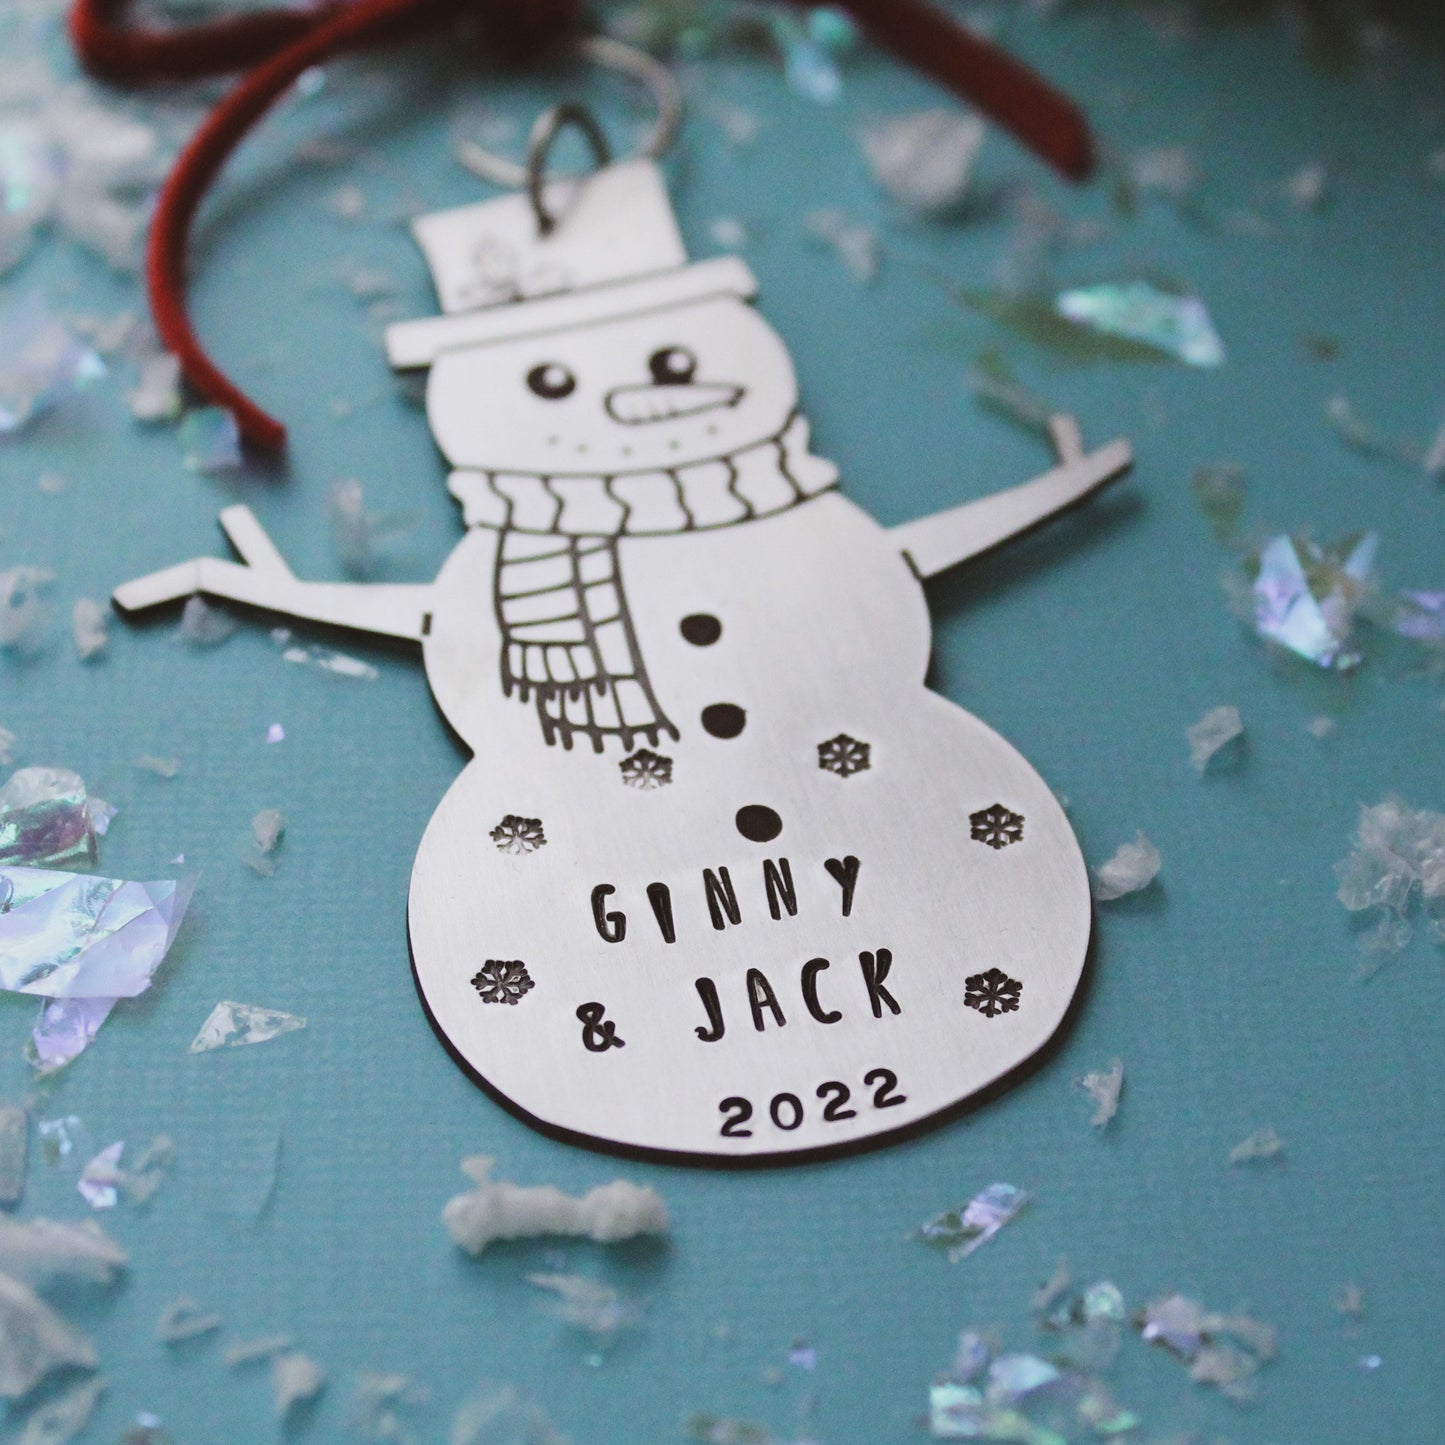 Snowman Christmas Ornament Personalized Hand Stamped in Aluminum, Cute Snowman Ornament, Custom Snowman Ornament, Family or Kids Ornament